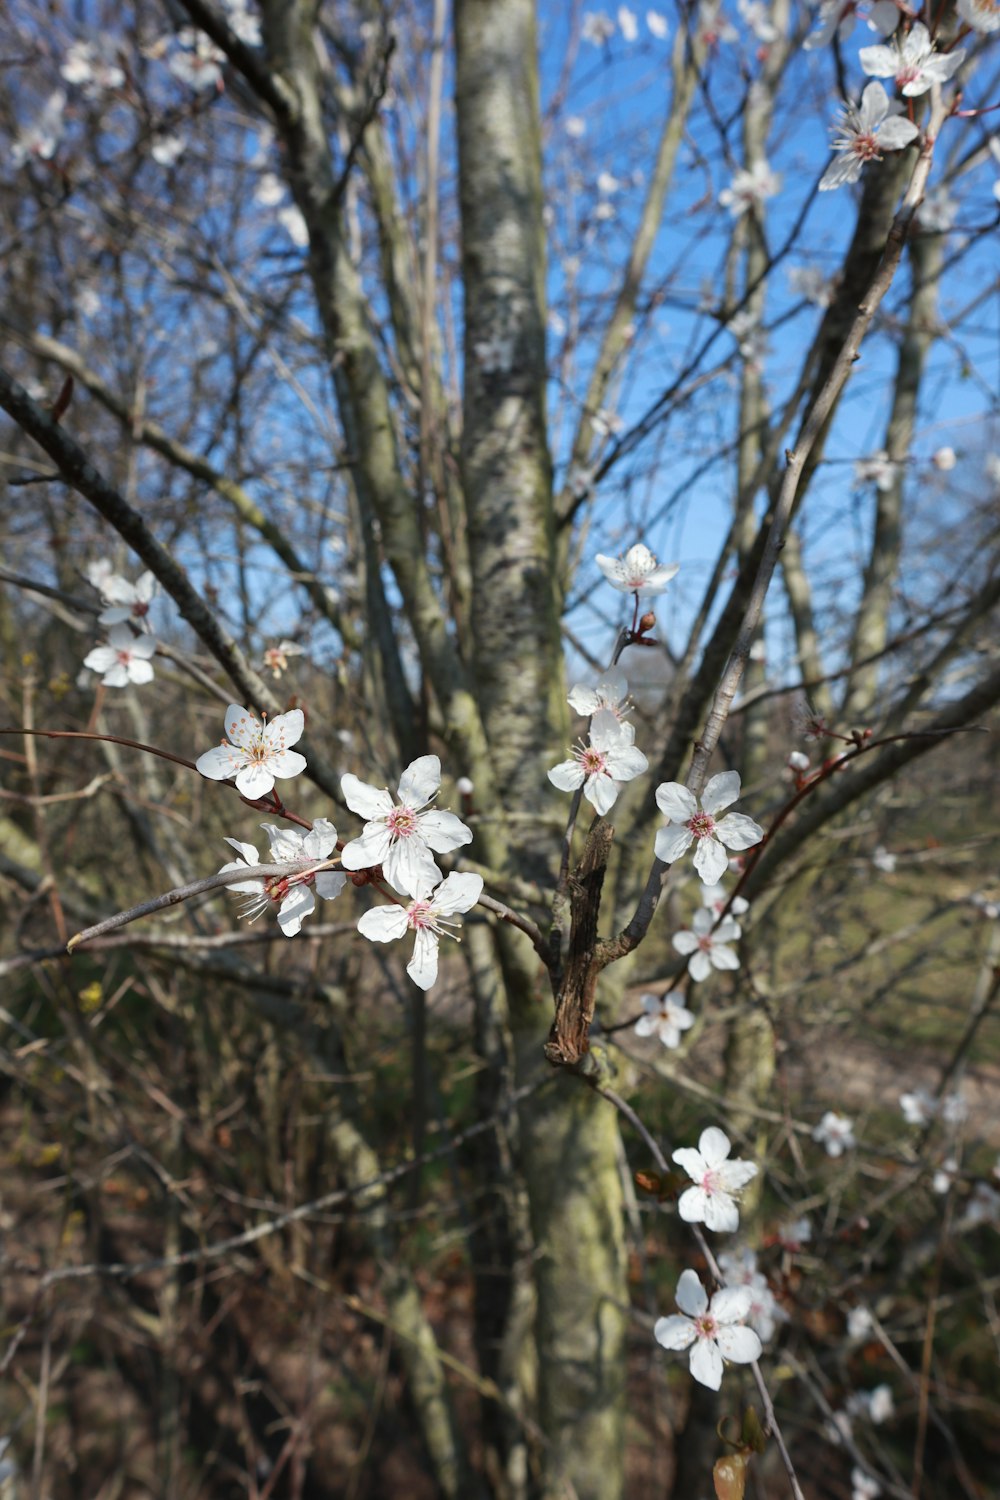 a tree with white flowers in front of a blue sky